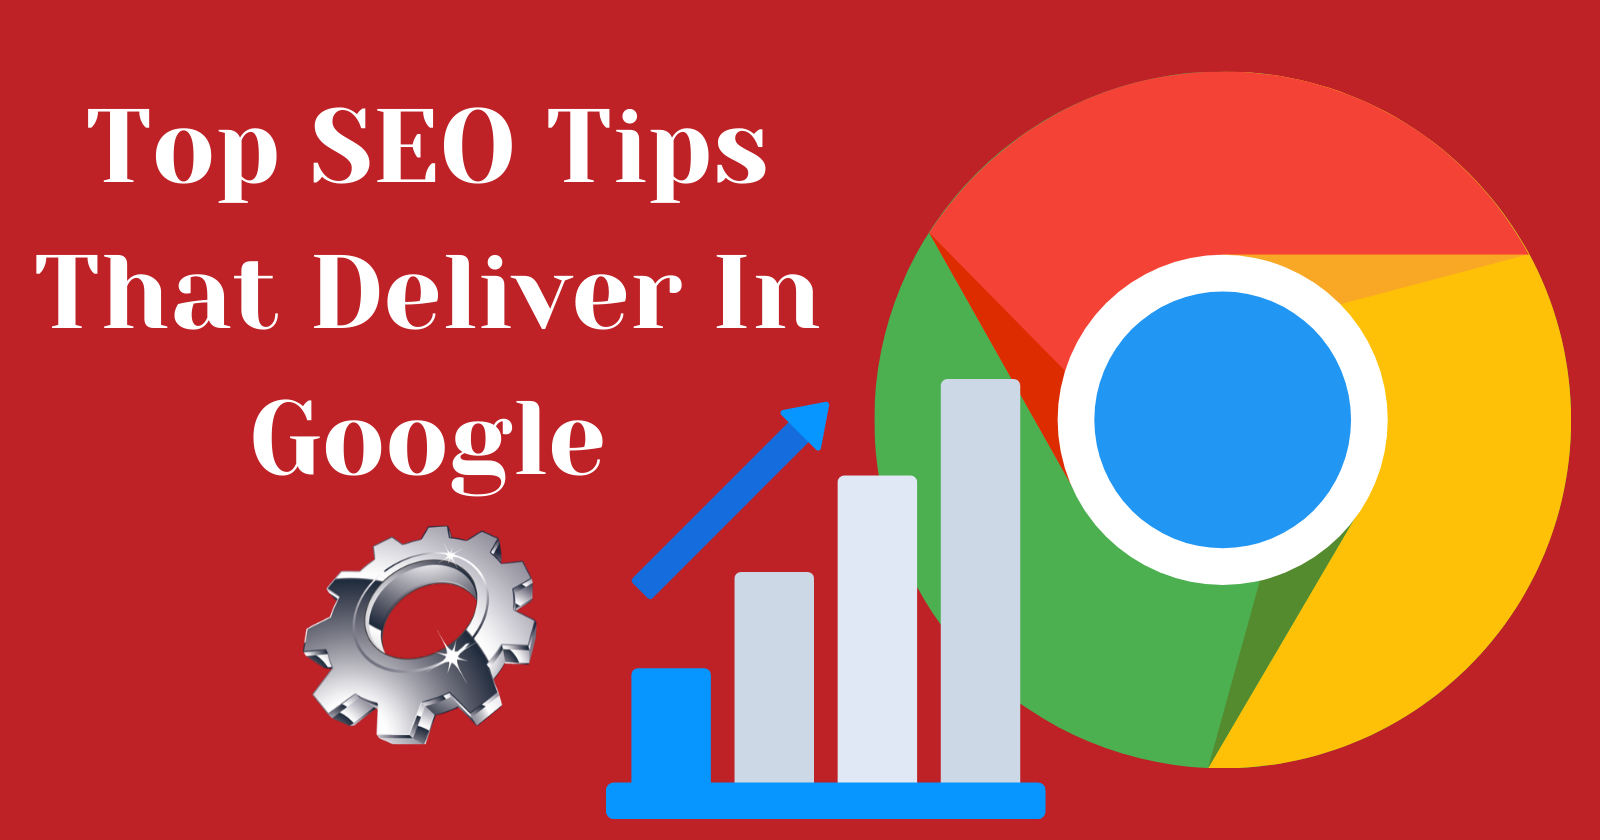 Top SEO Tips That Deliver In Google